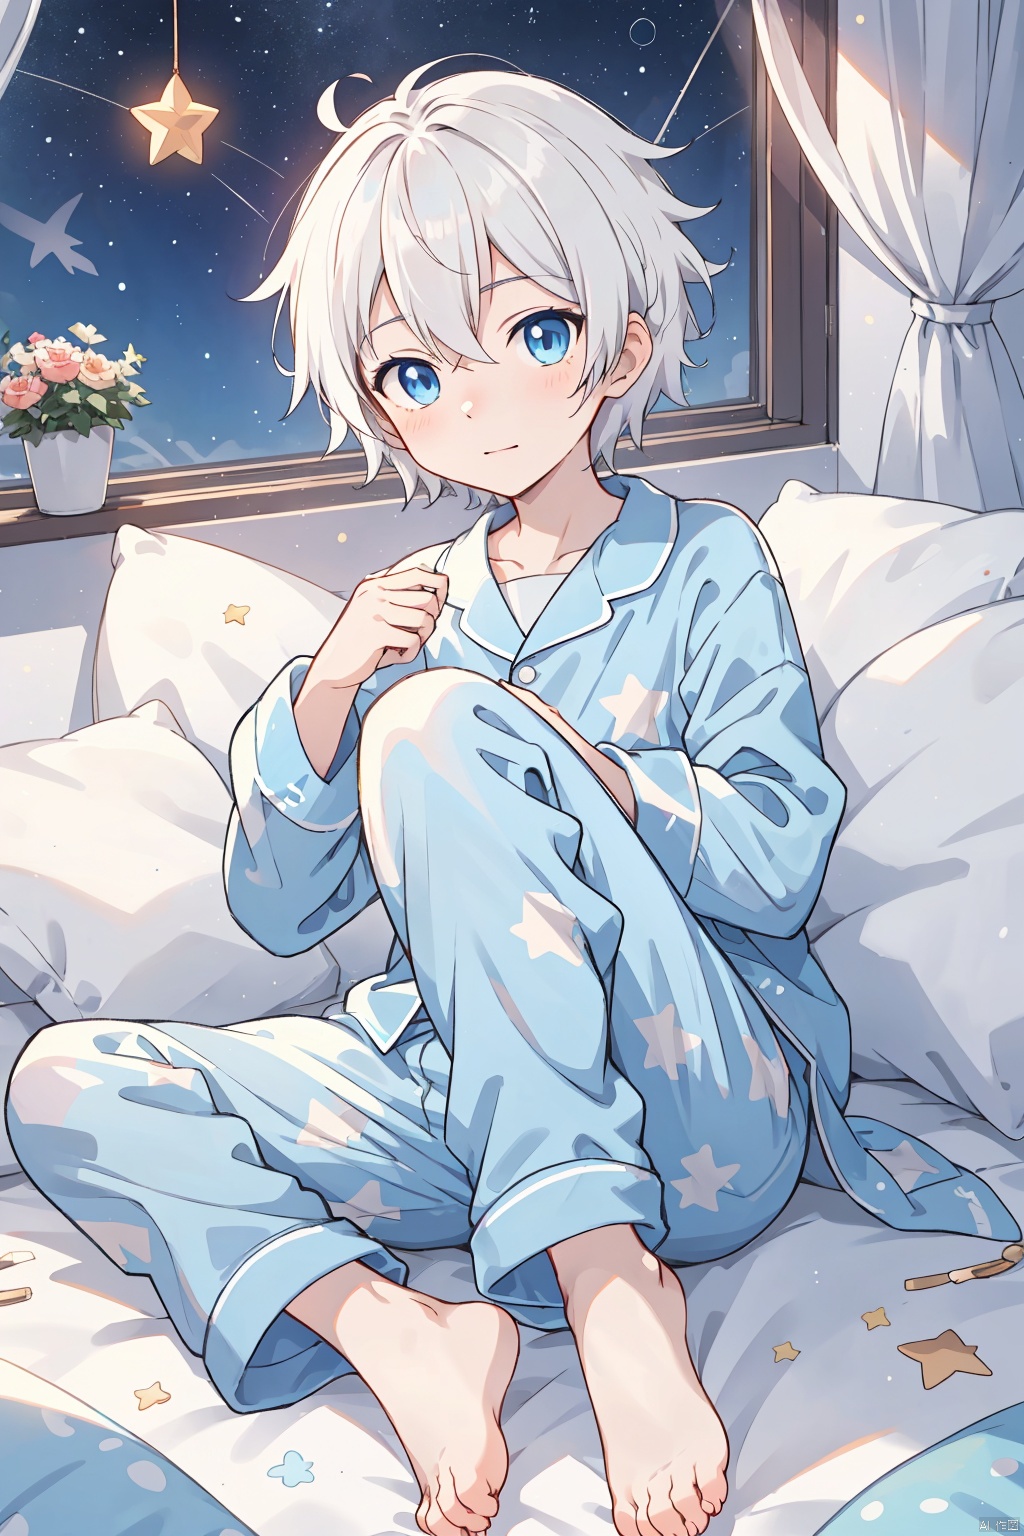  anime,8K,boy,Sixteen years old,whiter hair,blue eye,barefoot,Blue pajamas, Holding a five pointed star in hand, decorated with stars, dotted with dots